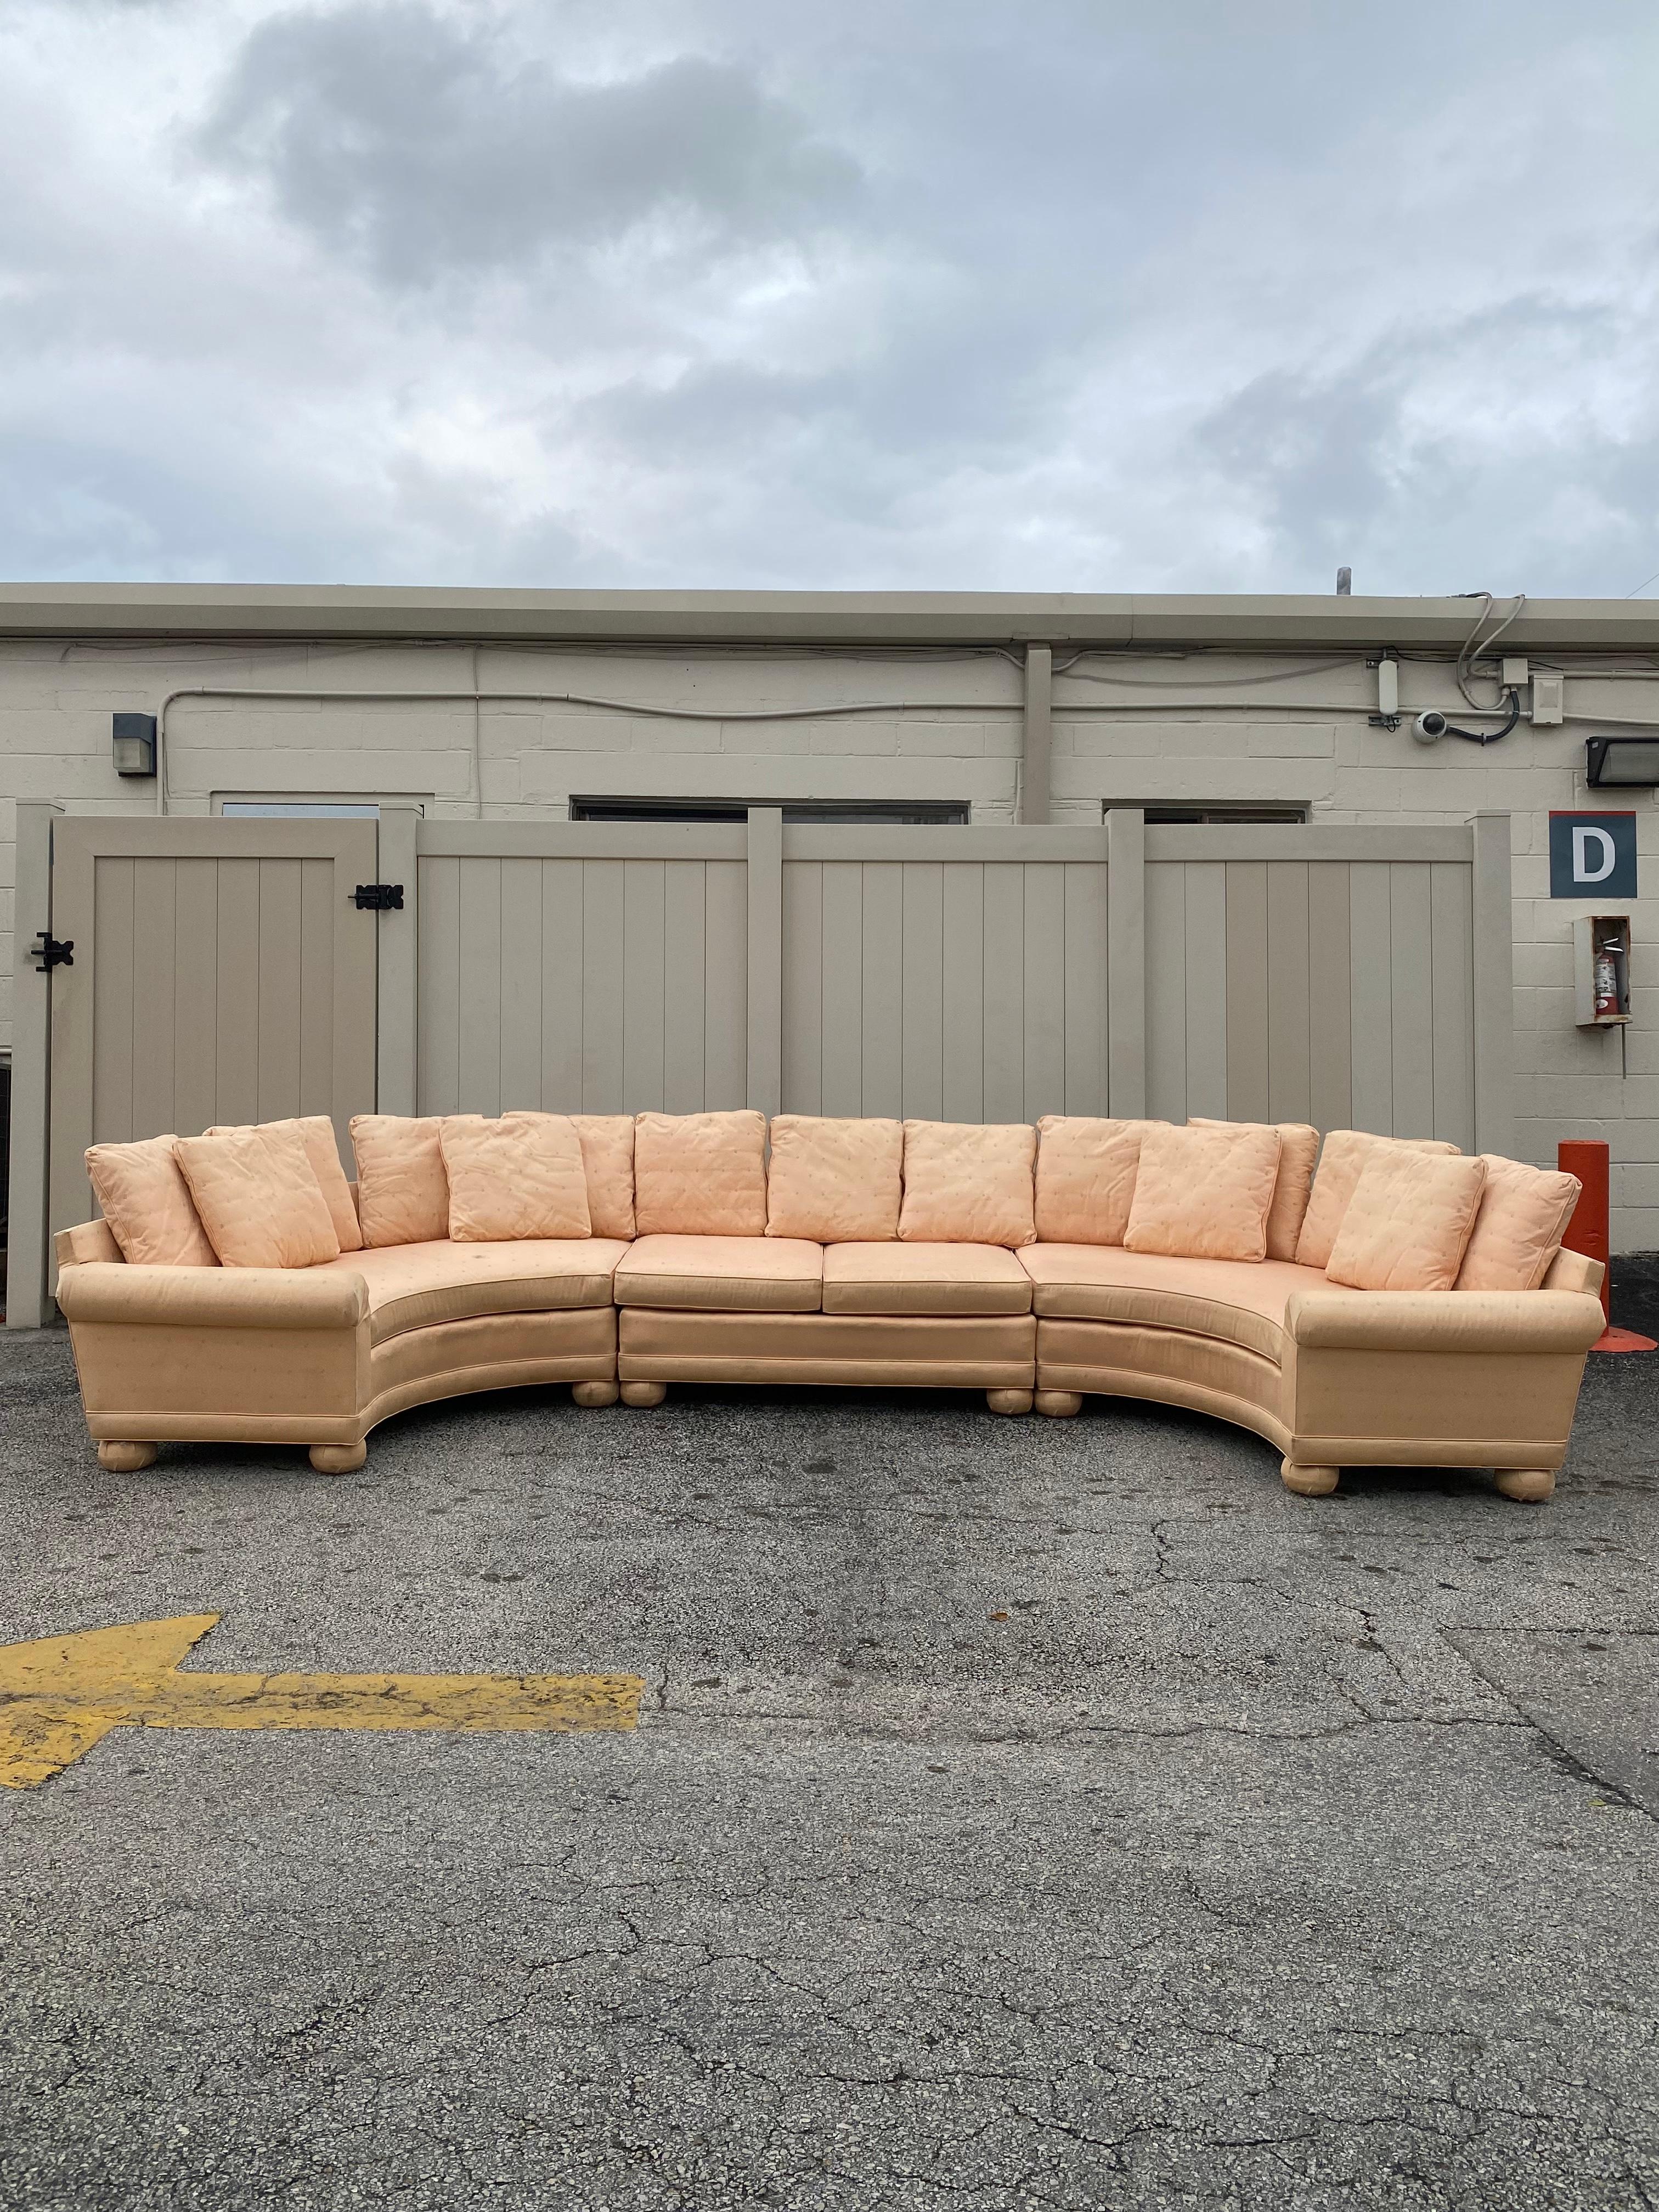 On offer on this occasion is one of the most stunning, midcentury sectional you could hope to find. This is an ultra-rare opportunity to acquire what is, unequivocally, the best of the best, it being a most spectacular and beautifully-presented 3